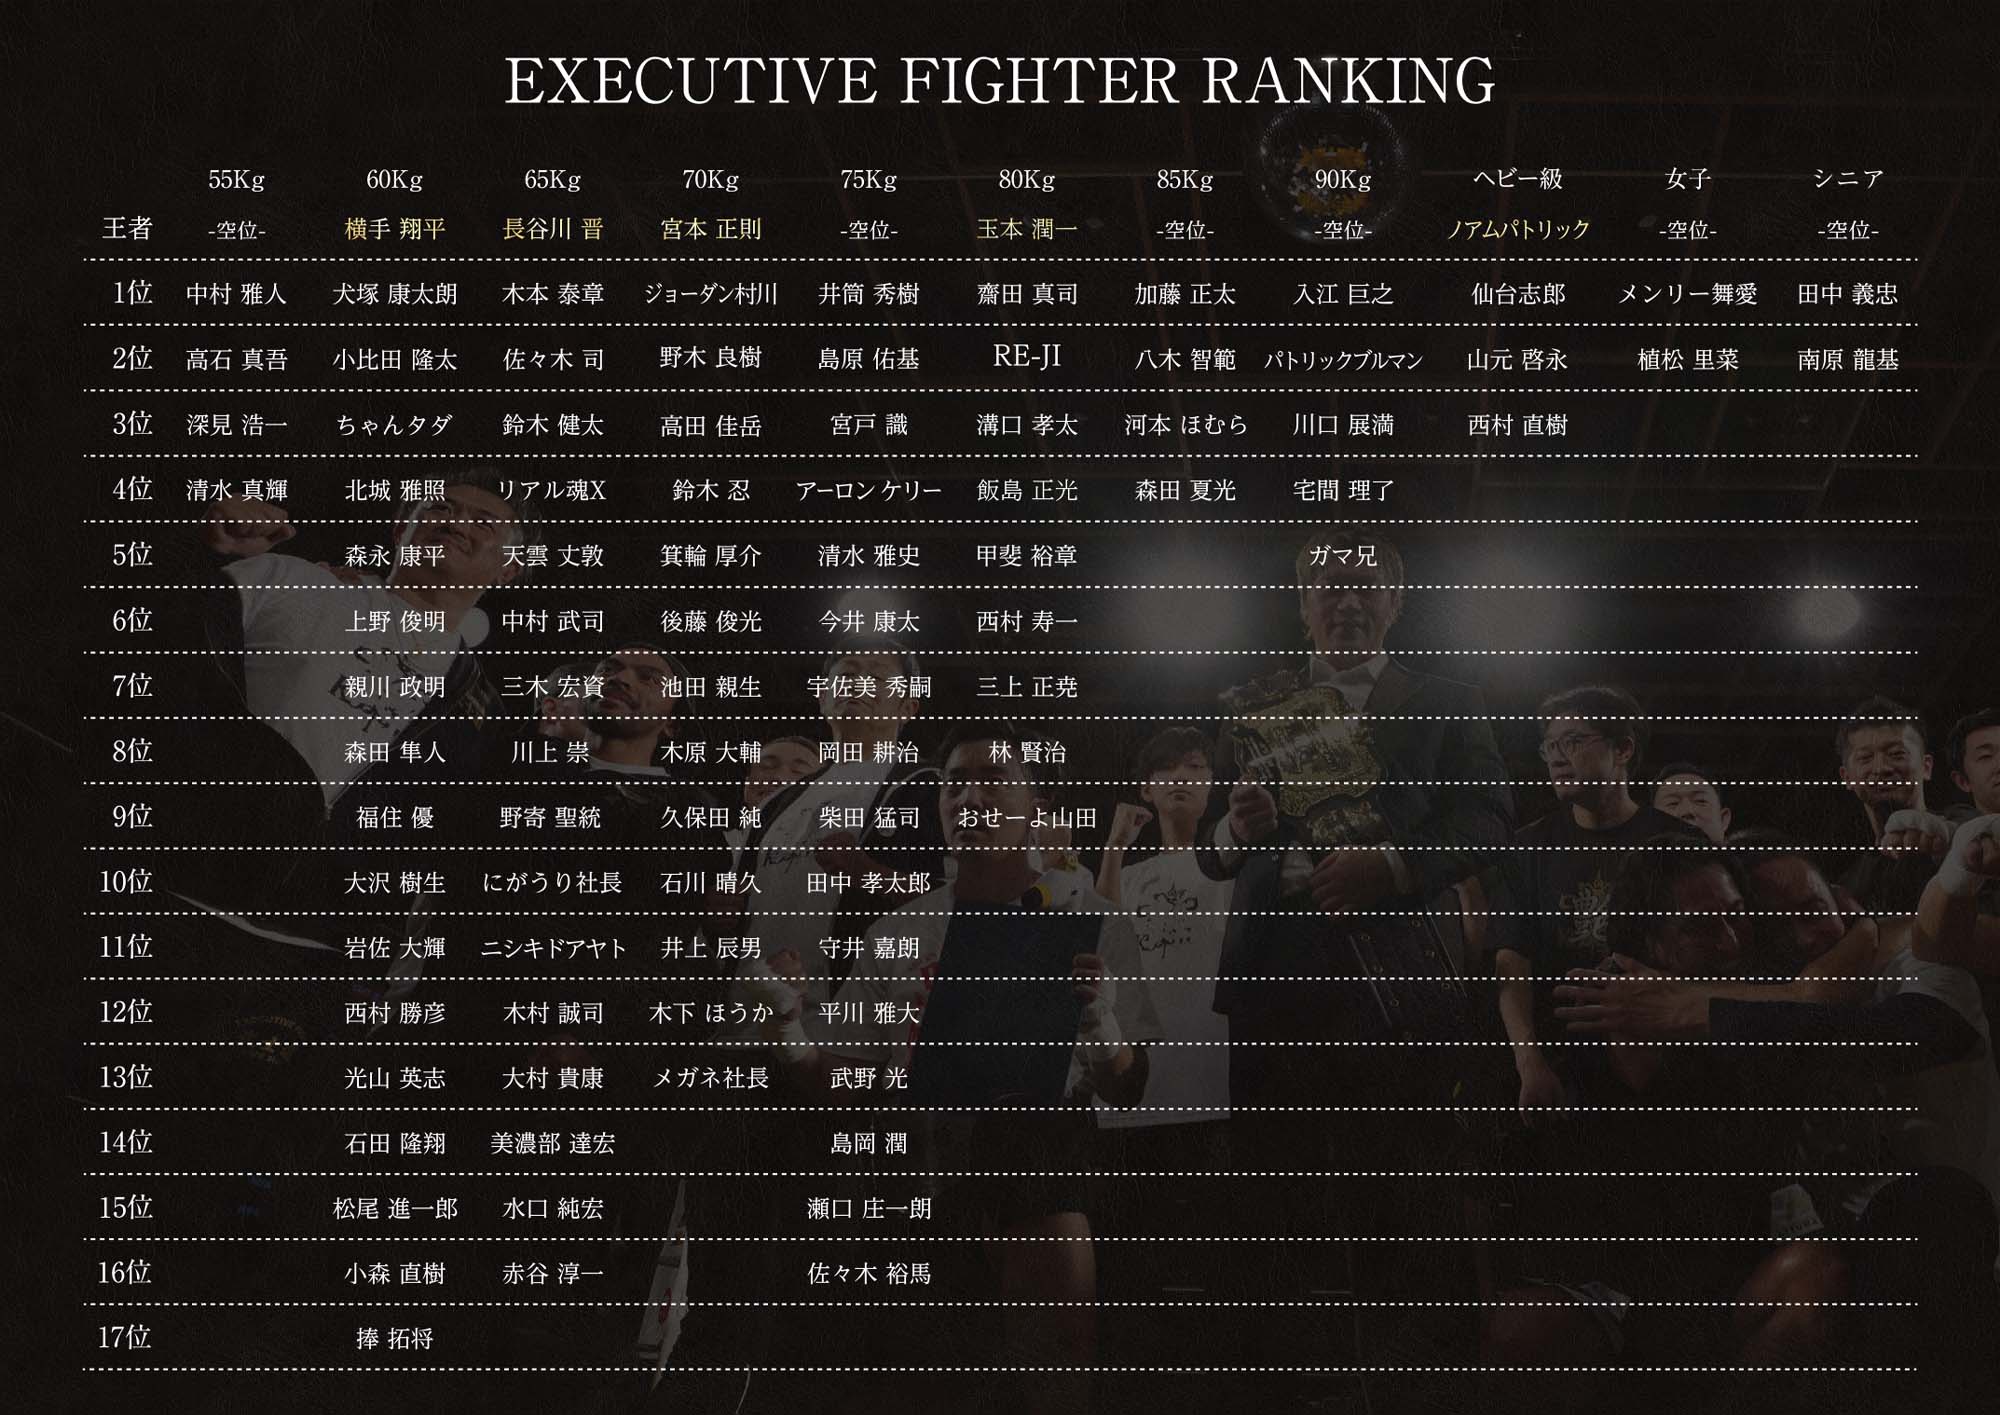 EXECUTIVE FIGHTER RANKING